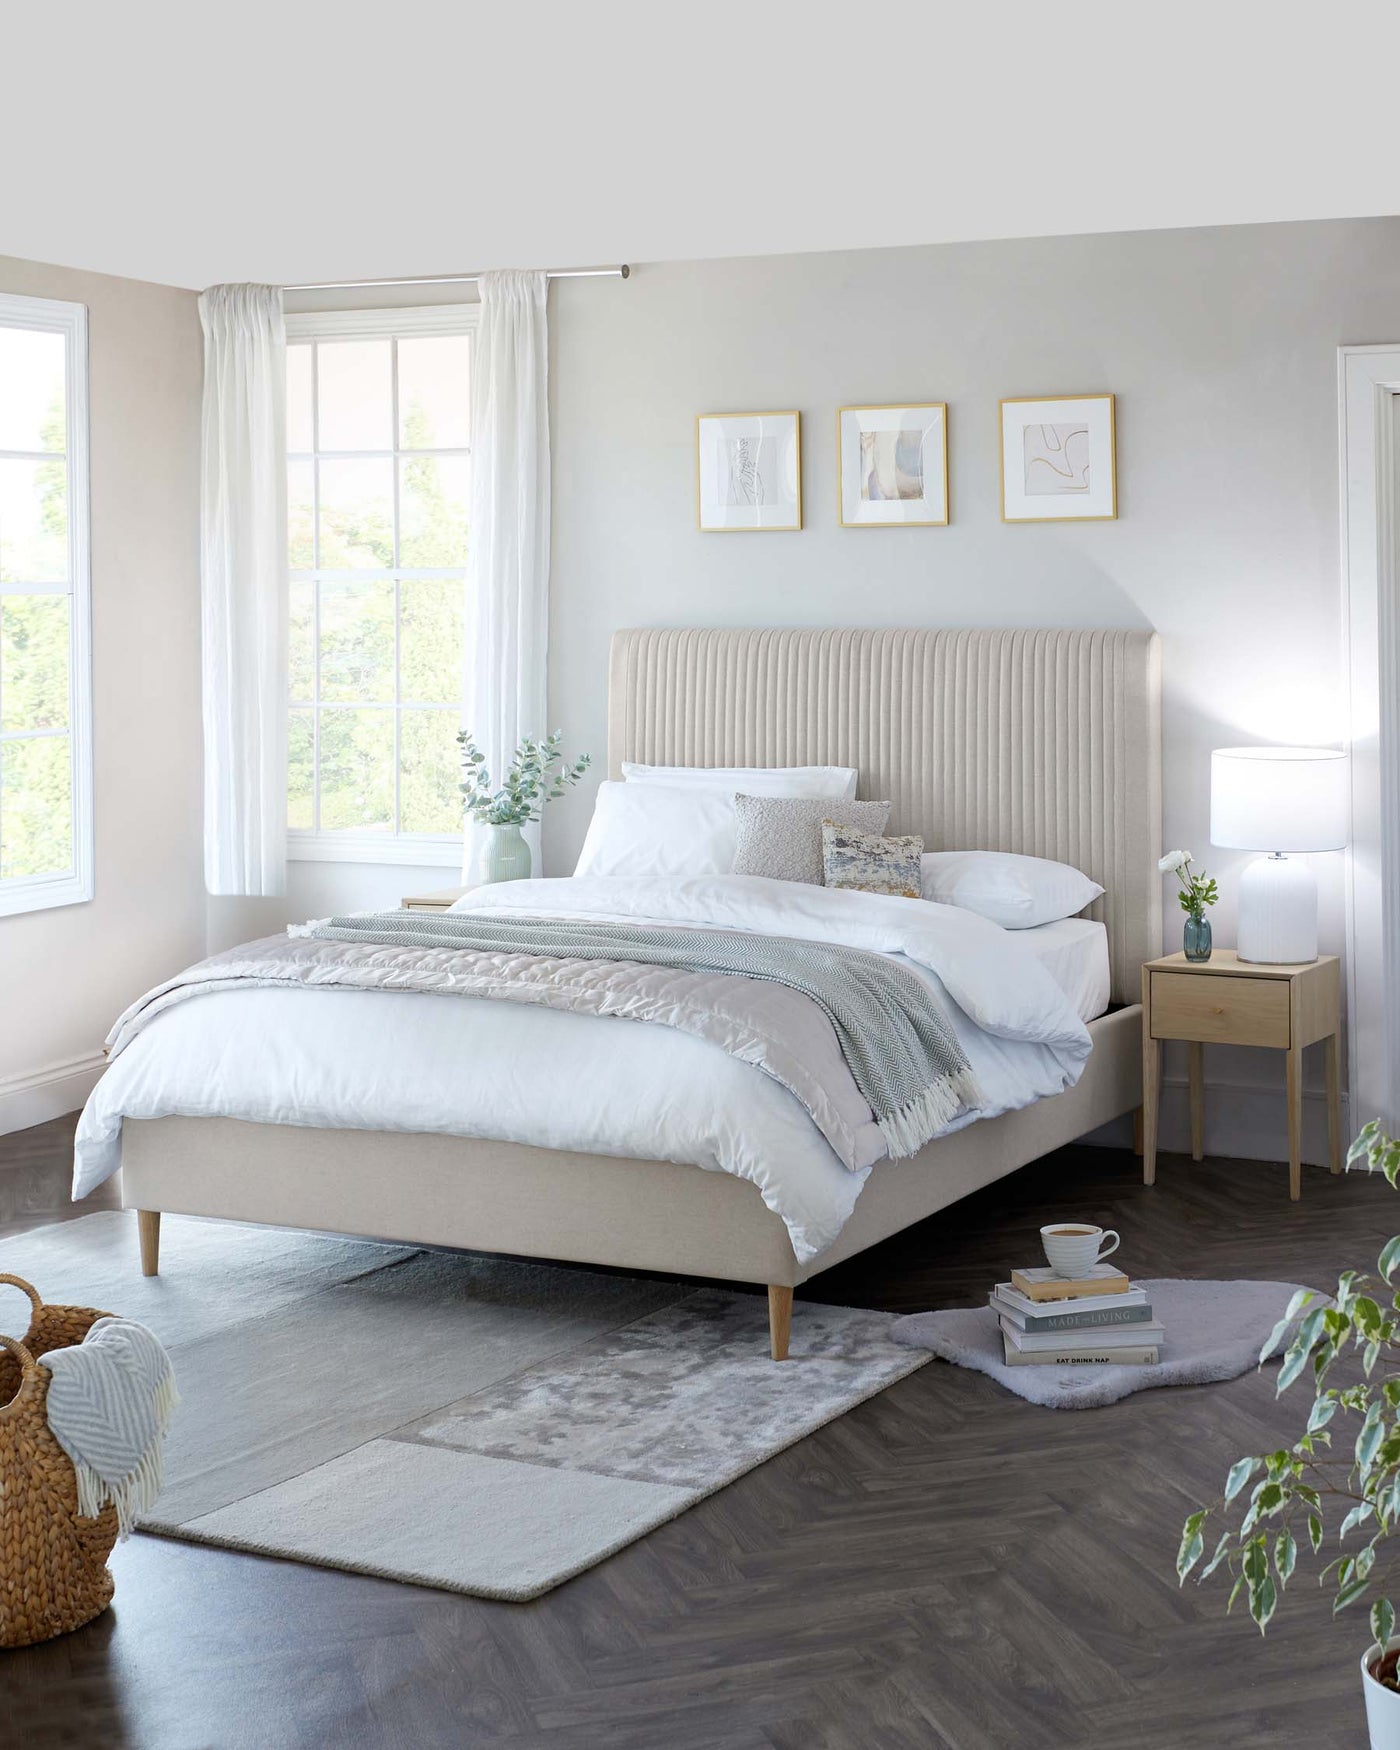 A contemporary bedroom featuring a beige upholstered bed with a vertically channelled headboard and mid-century modern style tapered legs, accompanied by two minimalist light wooden nightstands with a single drawer each. The decor includes white bedding with a light grey blanket and decorative cushions, complemented by a textured off-white throw placed at the foot of the bed. Soft natural light filters through the window, enhancing the calm and relaxed aesthetic of the space.